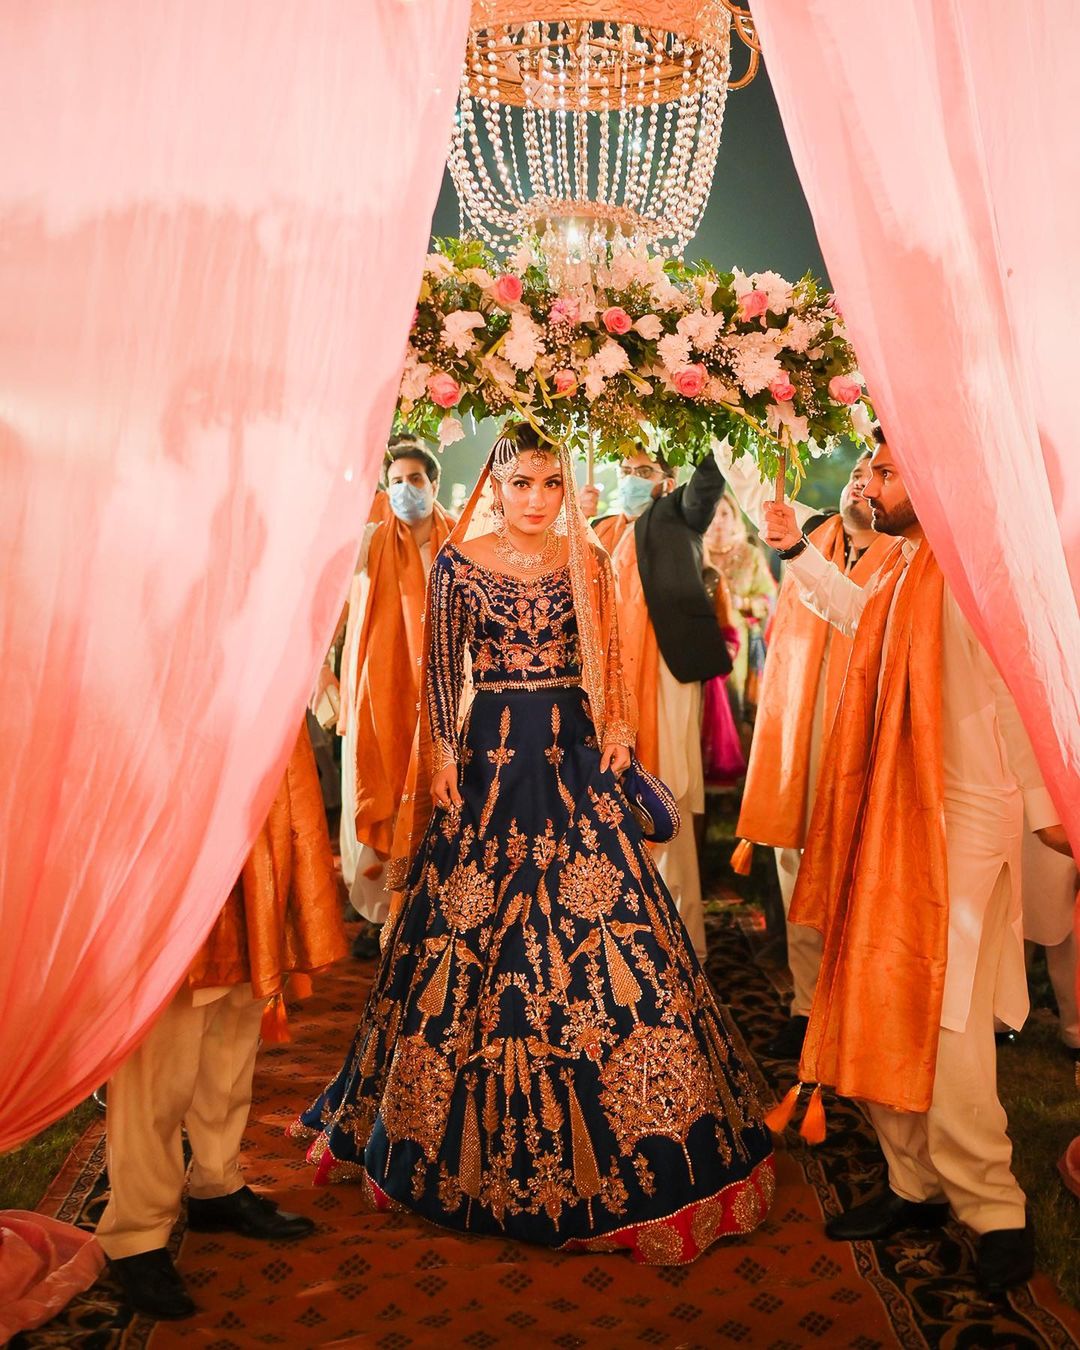 18.1k Likes, 167 Comments - Maha Noor (@mahasphotography) on Instagram:  “Bride of the day… | Bridal dresses pakistan, Desi wedding dresses,  Pakistani bridal dresses